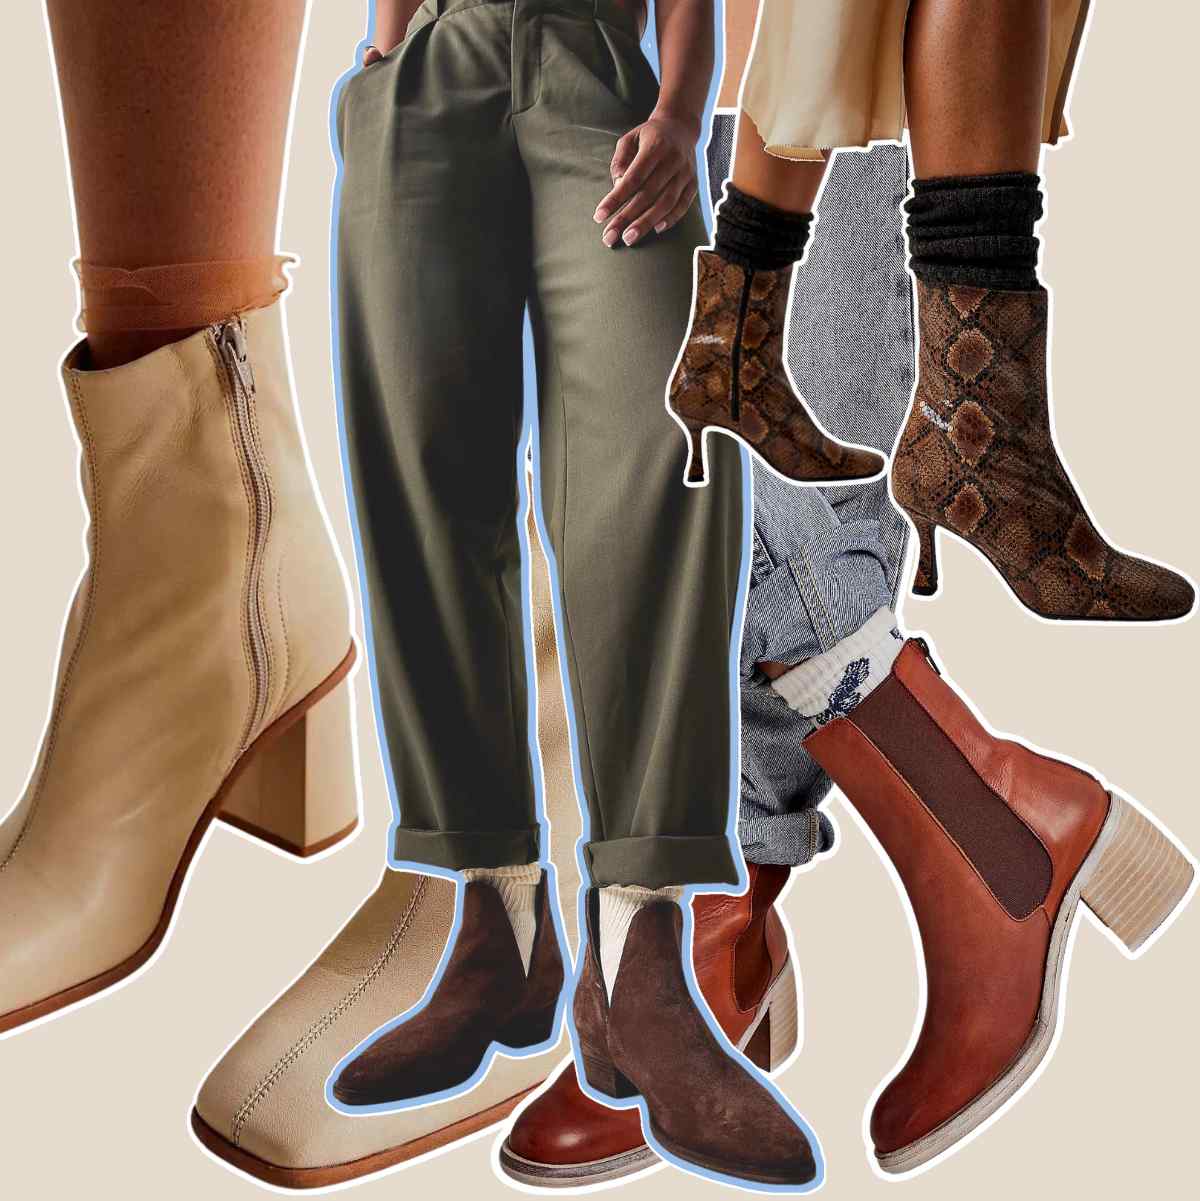 Collage of 4 women's feet wearing ankle boots with socks.